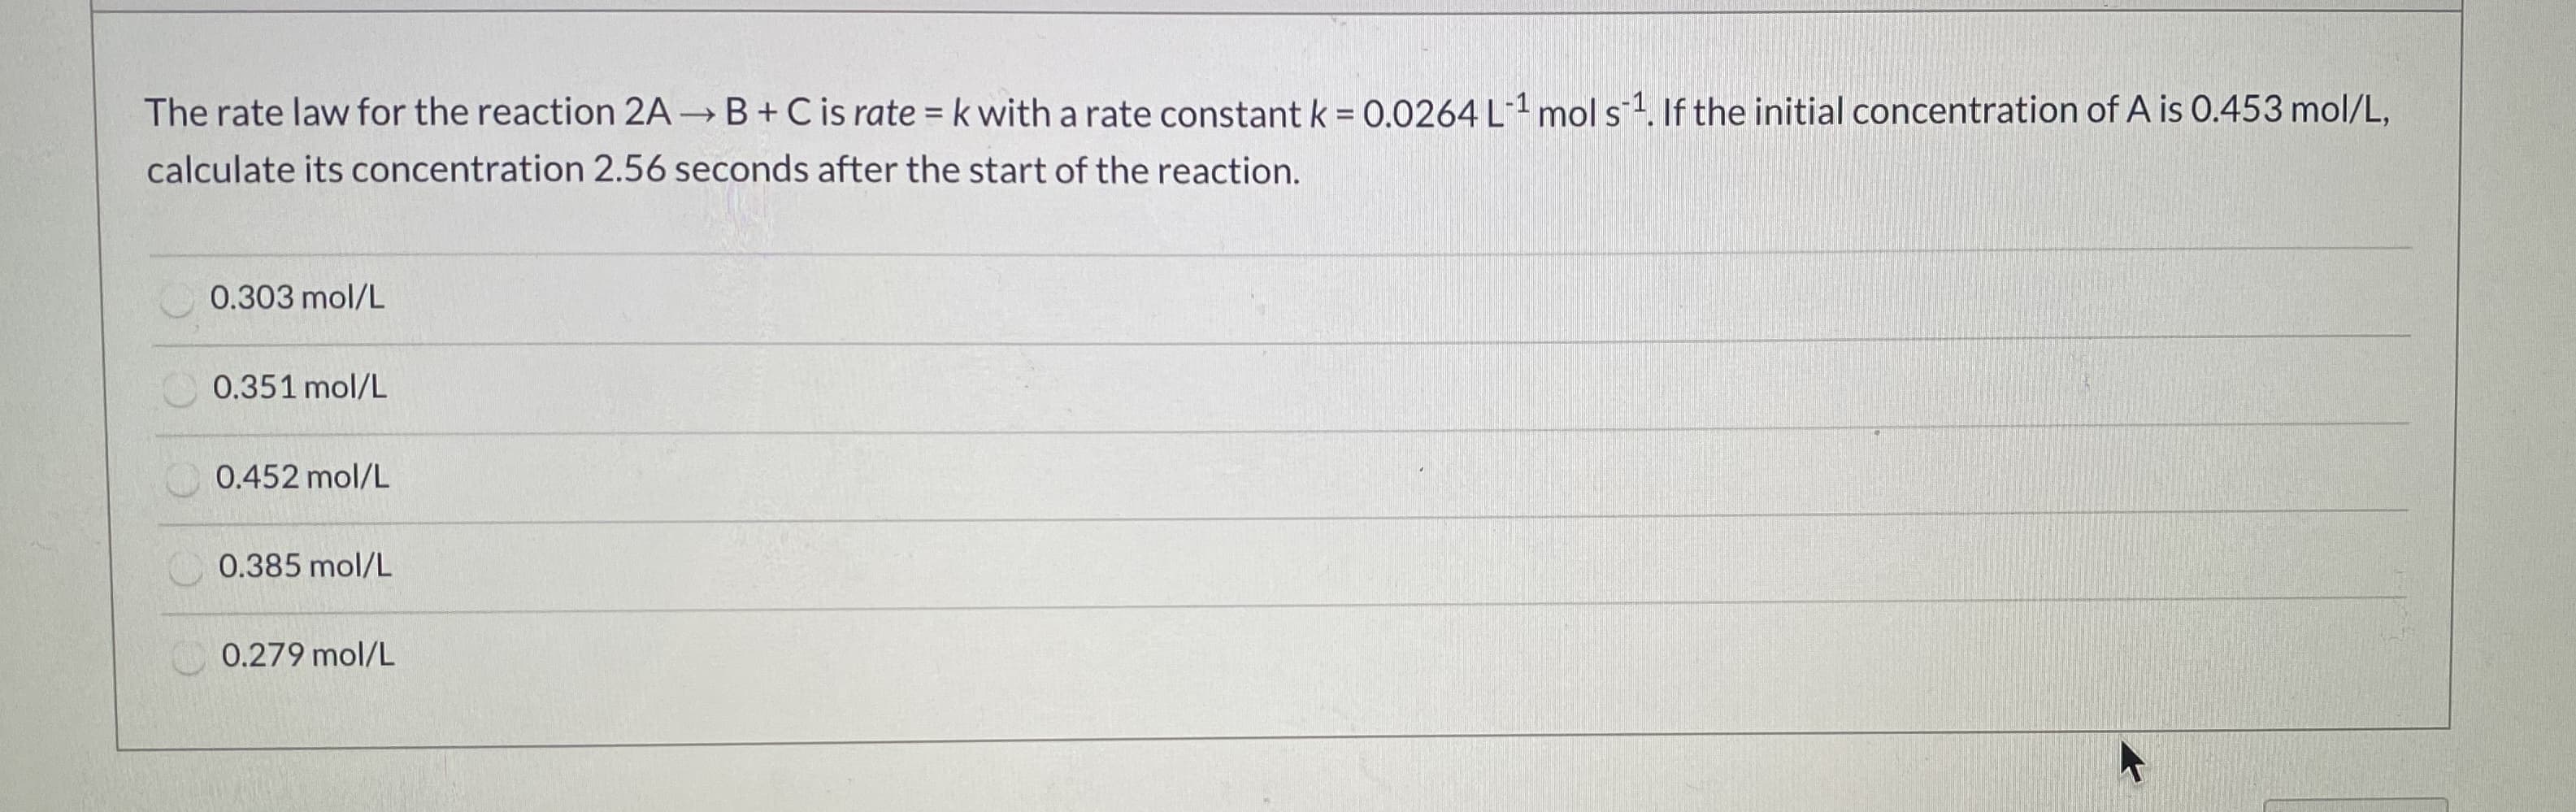 The rate law for the reaction 2A B+Cis rate = k with a rate constant k = 0.0264 L1 mol s.If the initial concentration of A is 0.453 mol/L,
calculate its concentration 2.56 seconds after the start of the reaction.
